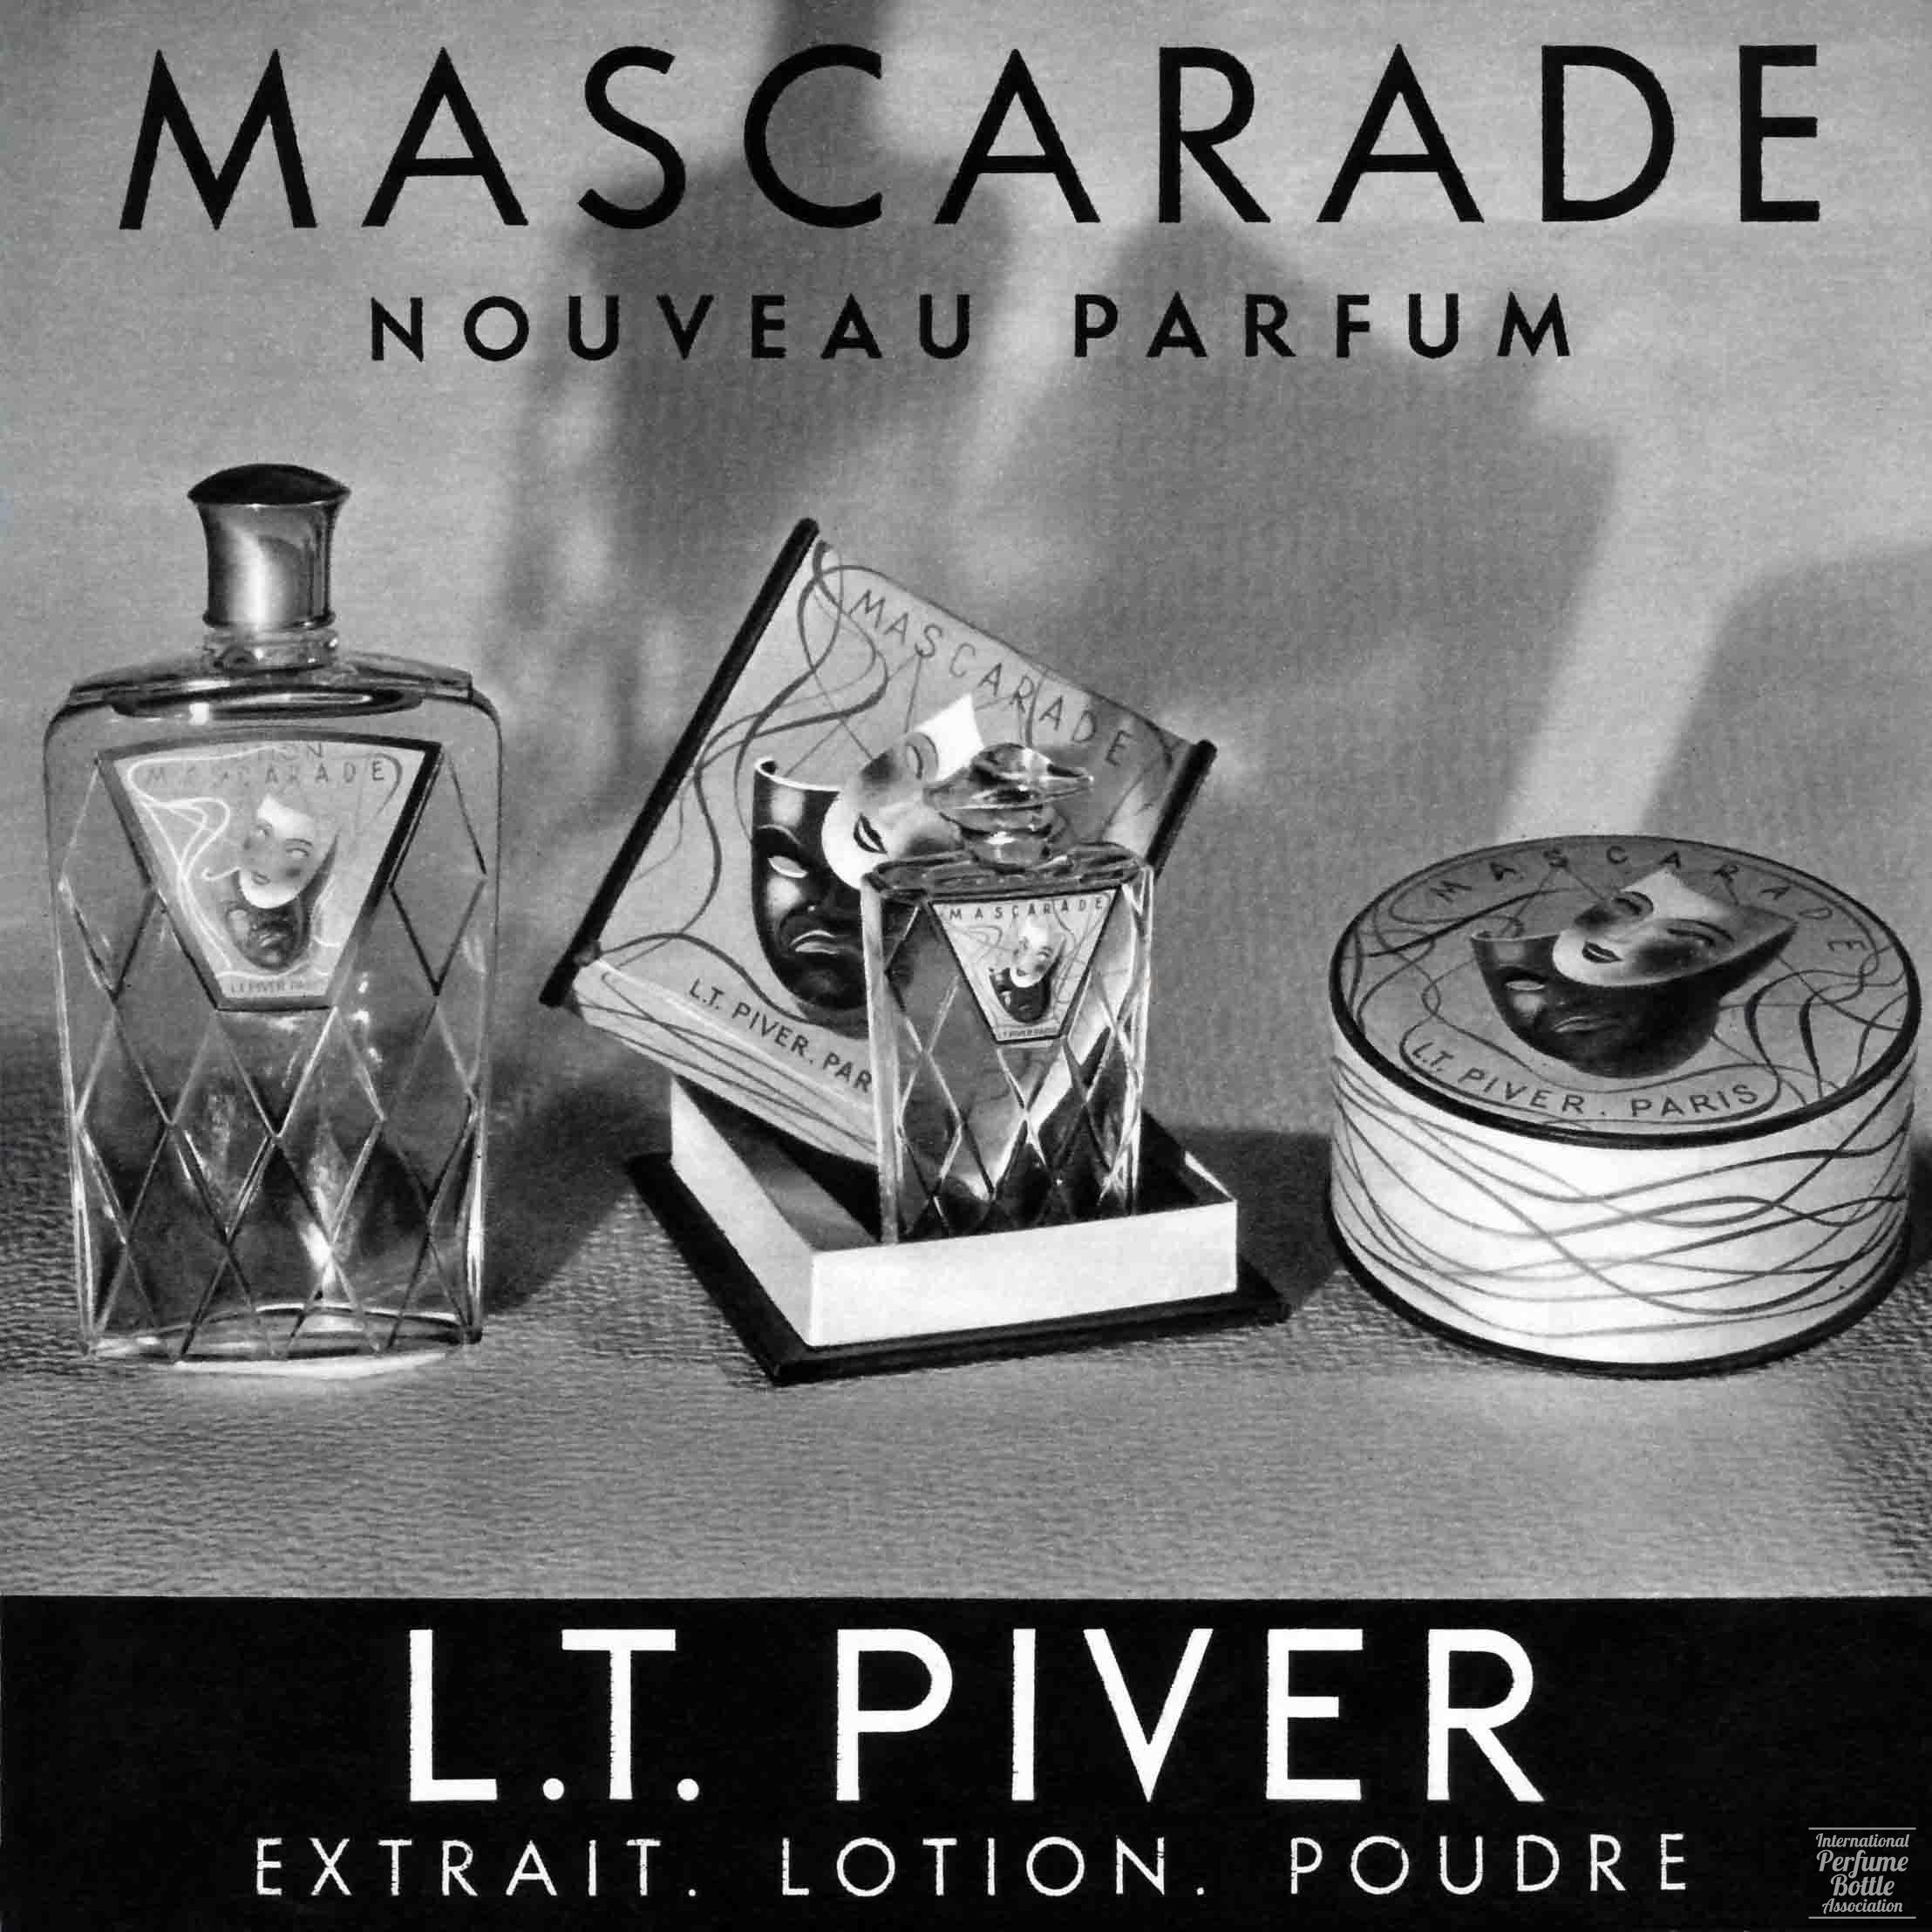 "Mascarade" by L. T. Piver Advertisement - 1936